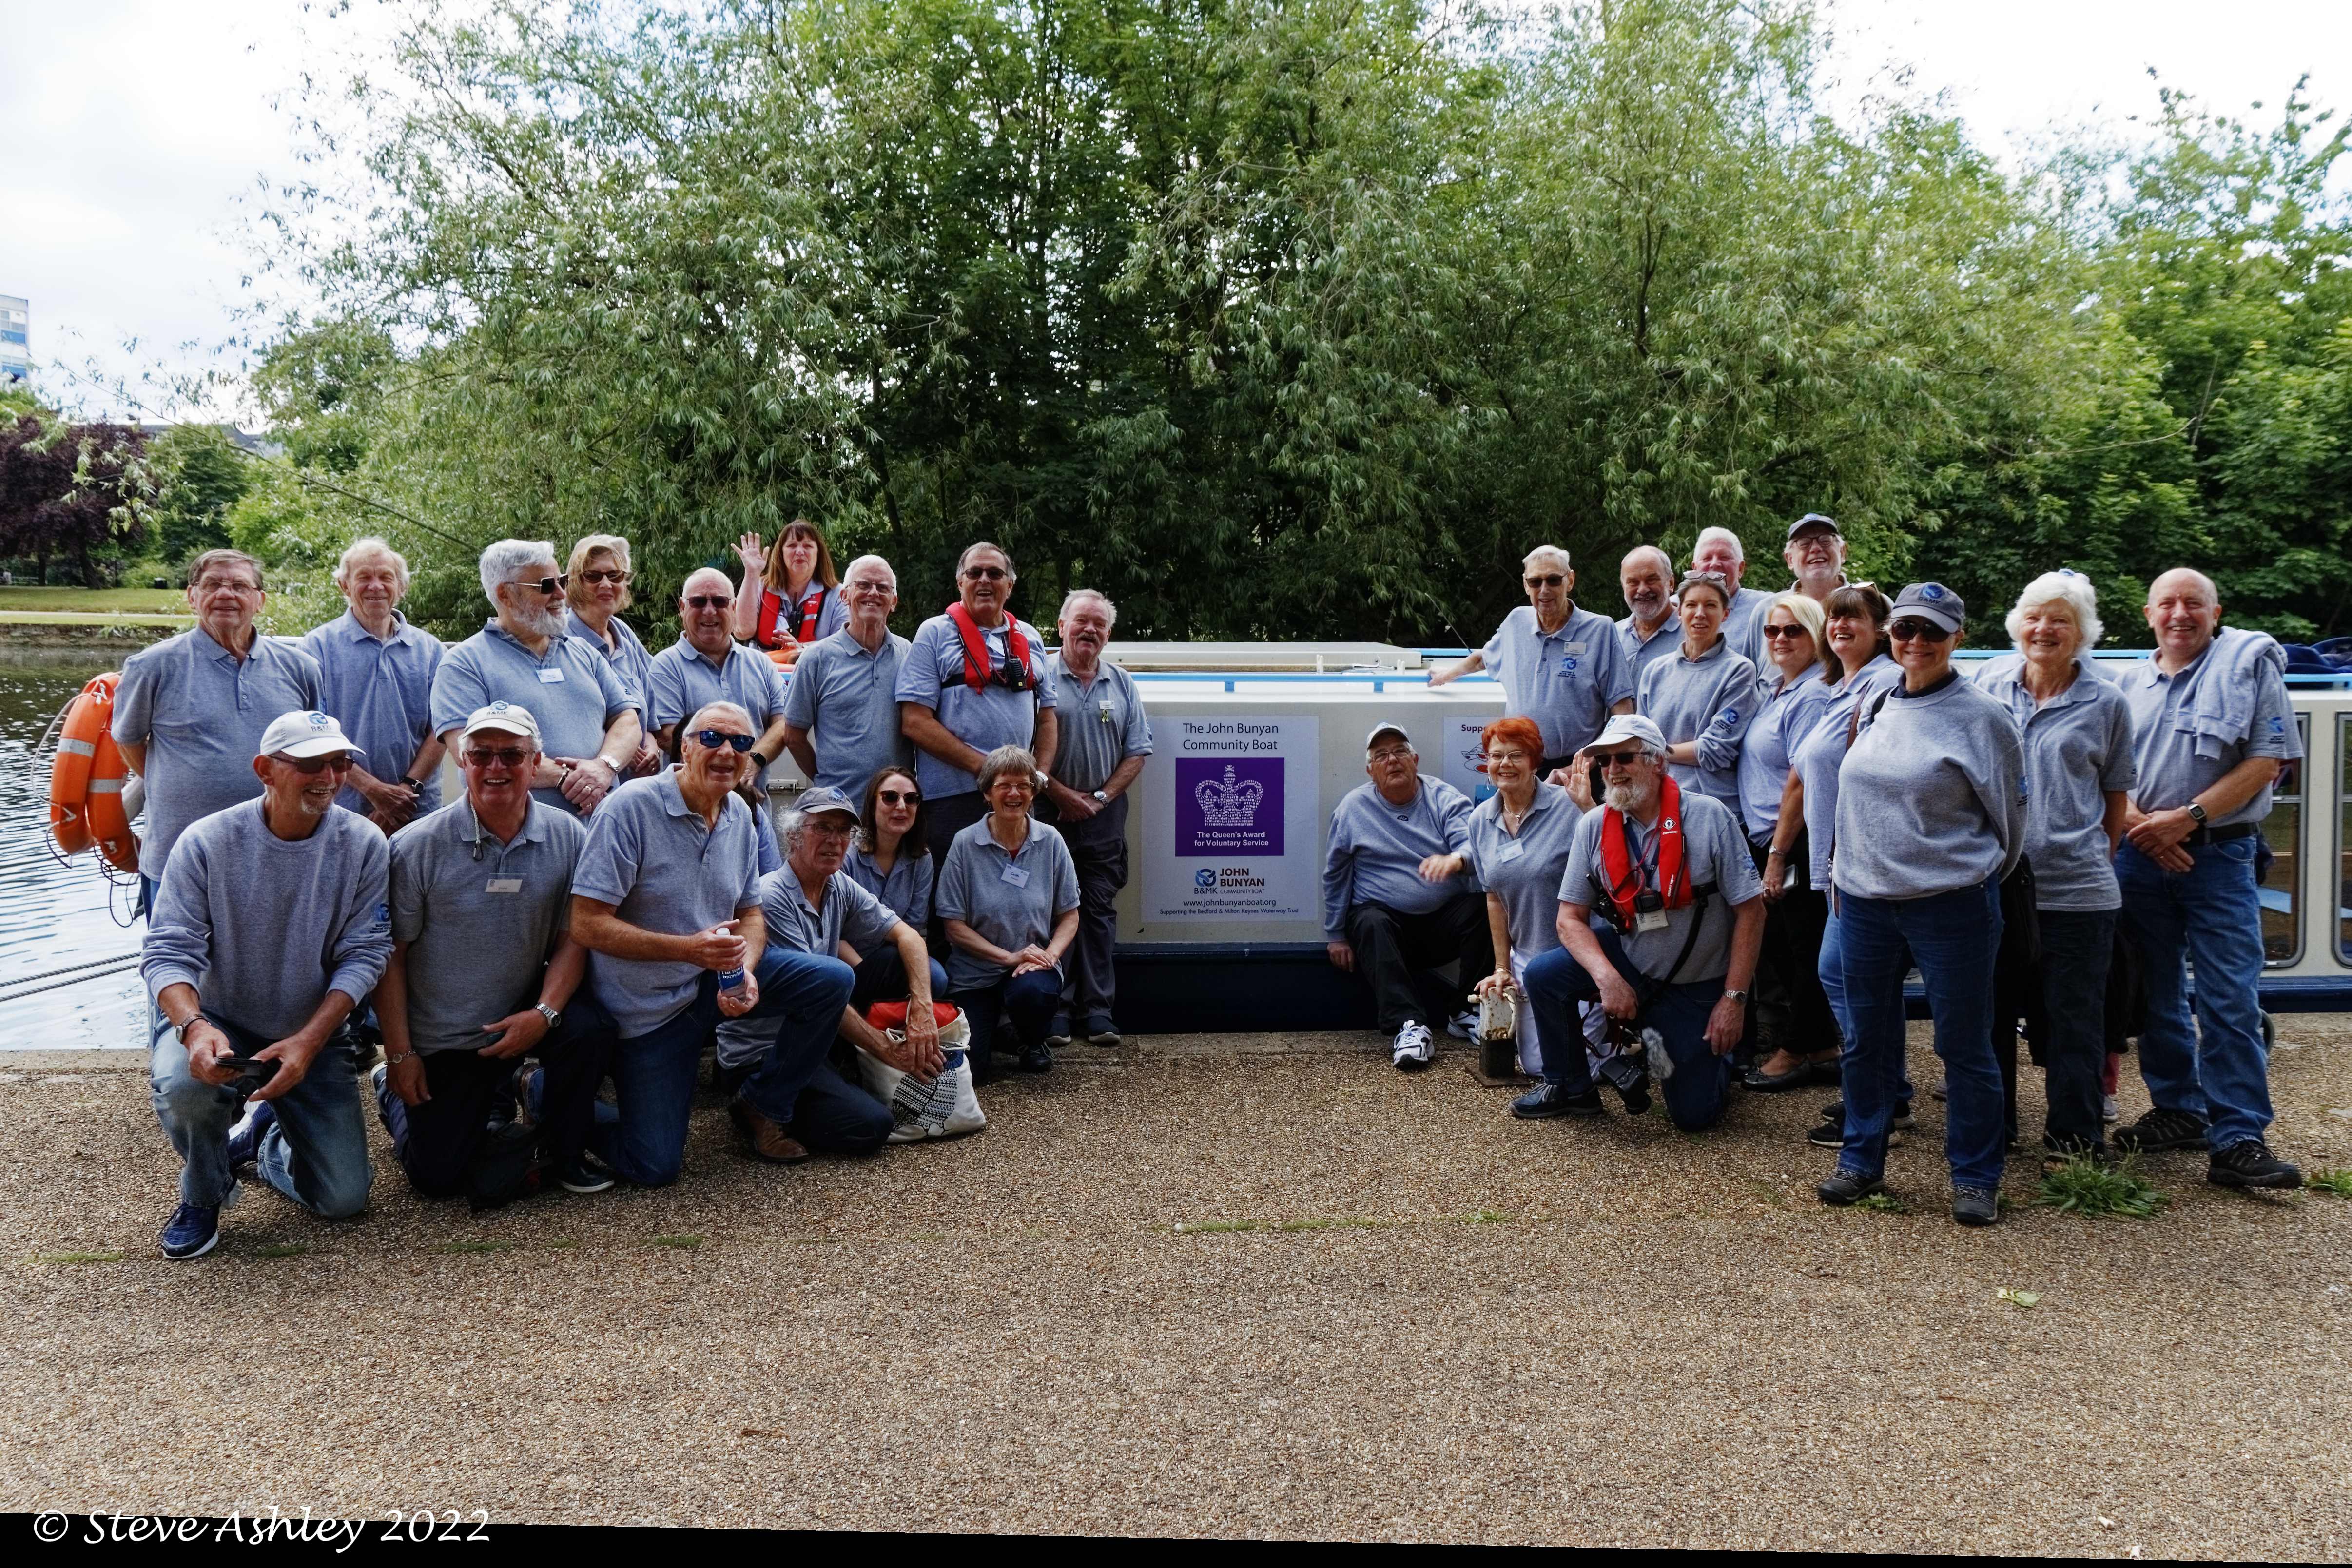 The John Bunyan Community Boat receives The Queen’s Award for Voluntary Service